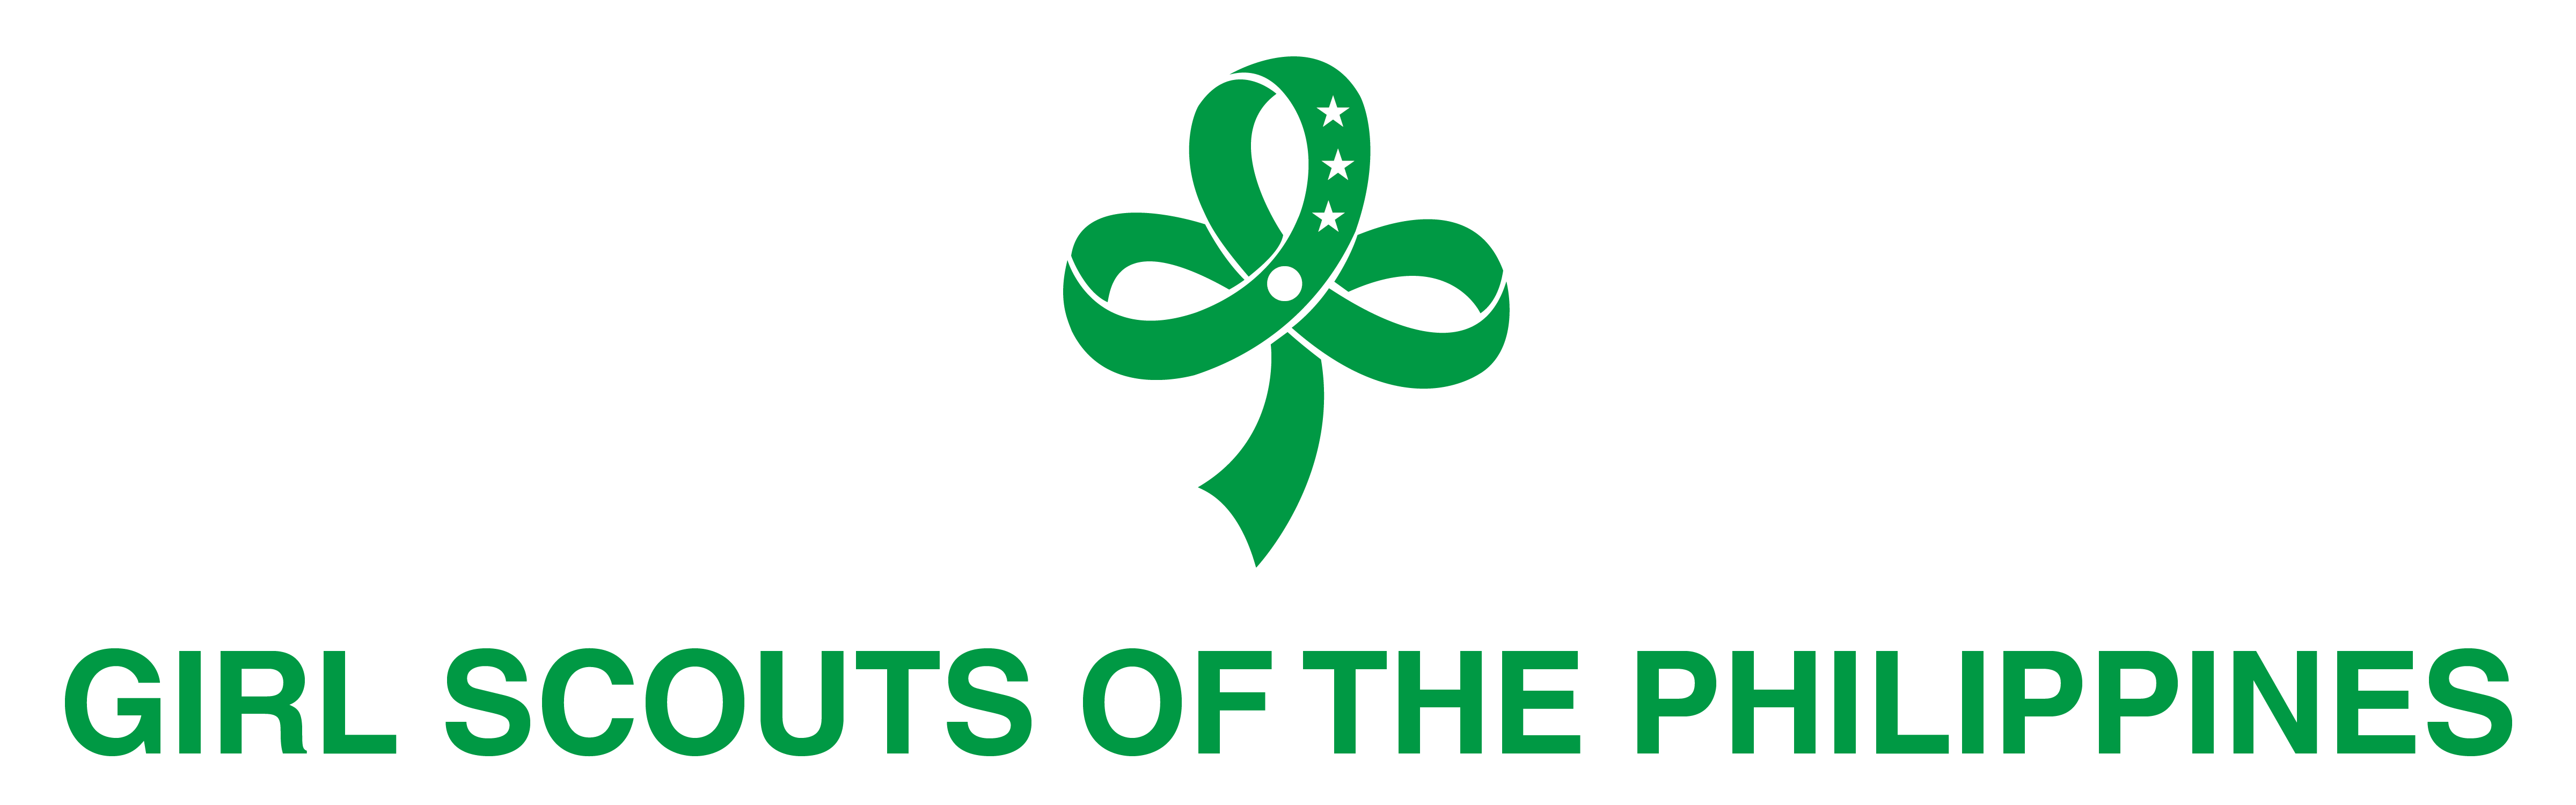 Girl Scout Logo - Girl Scouts of the Philippines